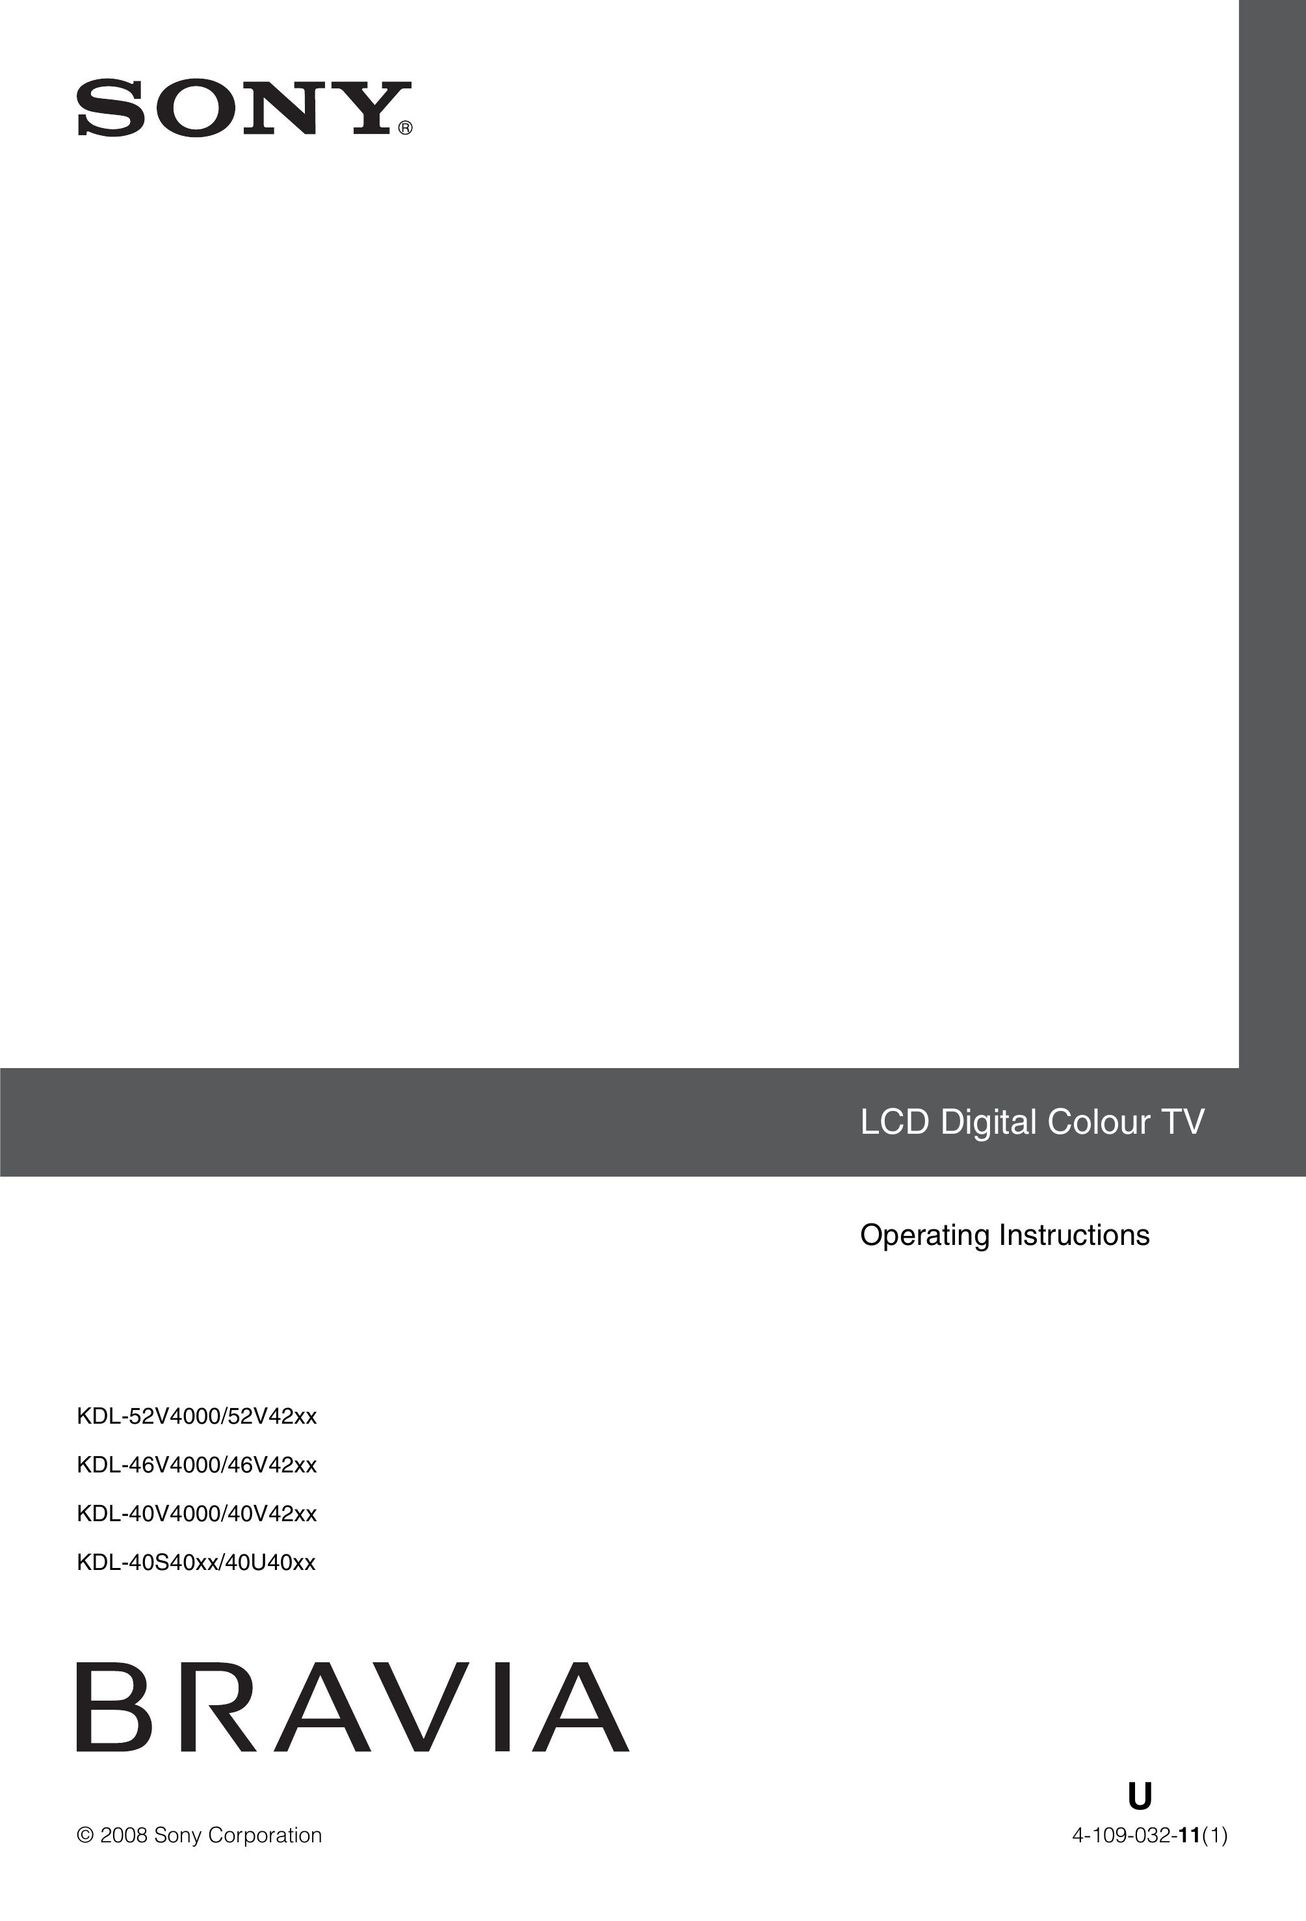 Sony 4-109-032-11(1) Flat Panel Television User Manual